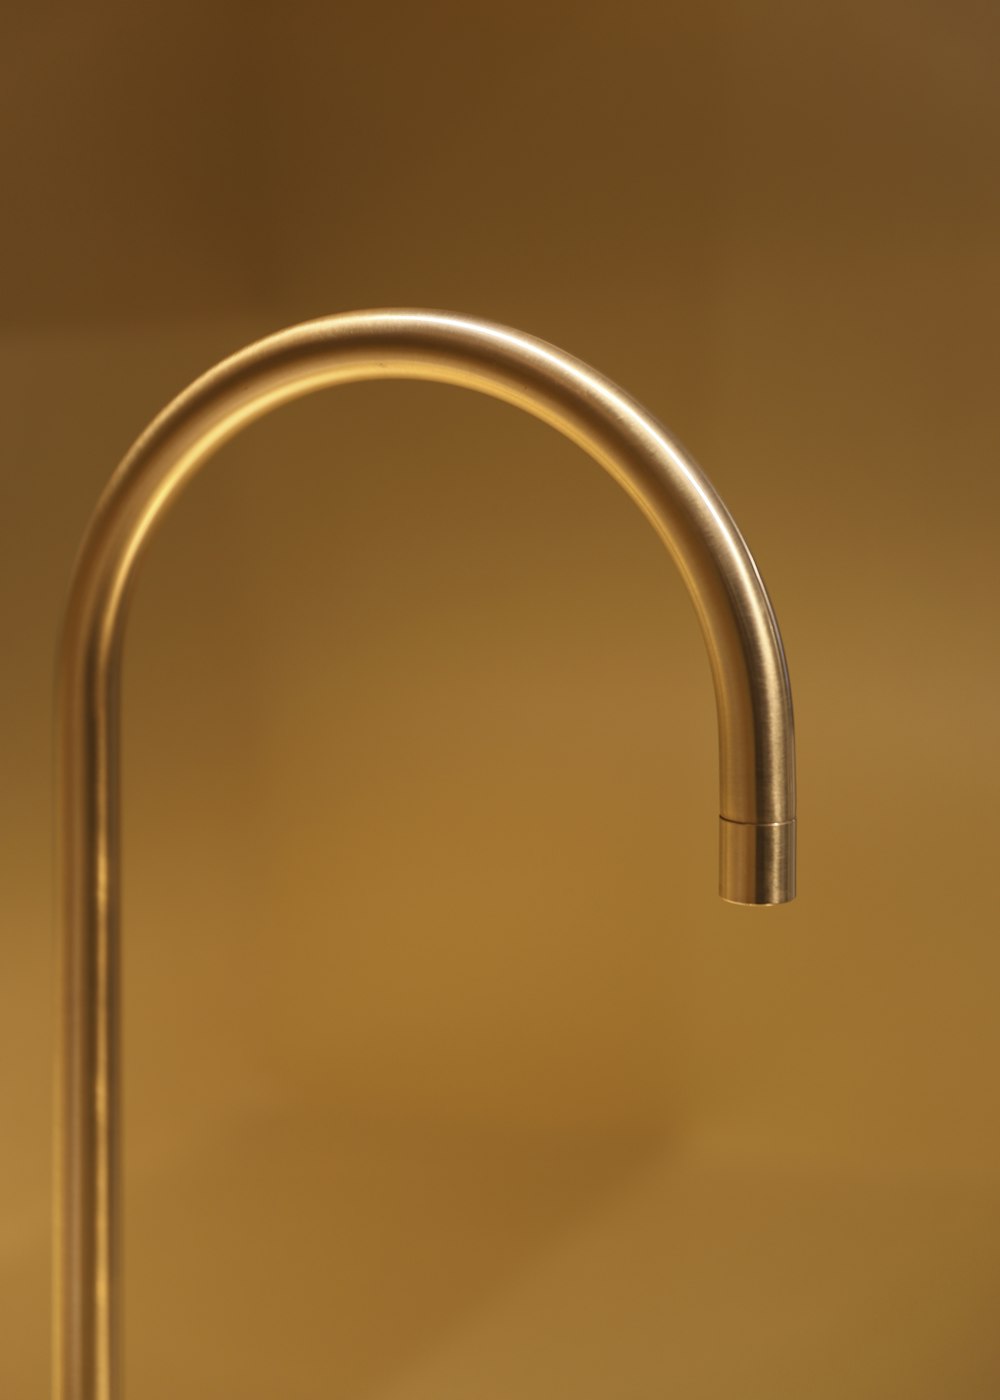 stainless steel faucet in close up photography